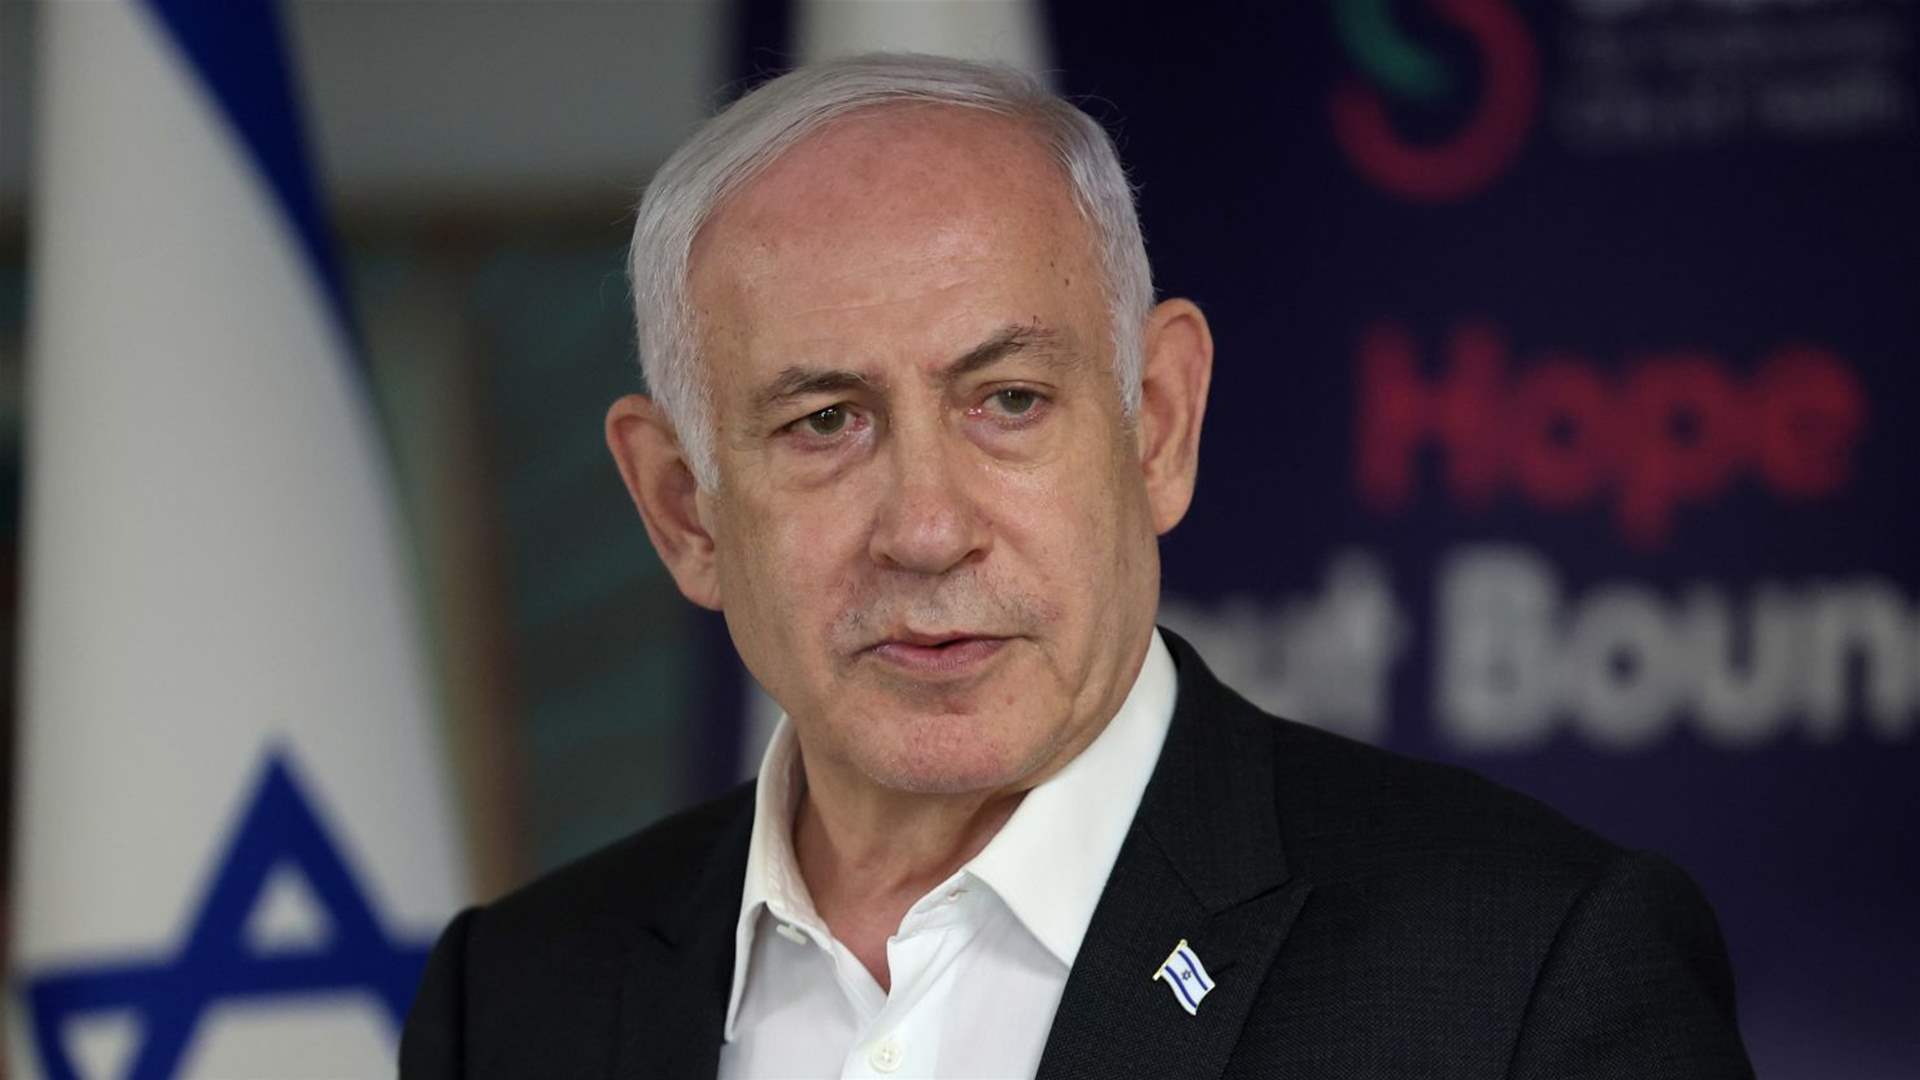 Netanyahu: Intense fighting against Hamas nearing end, but war continues